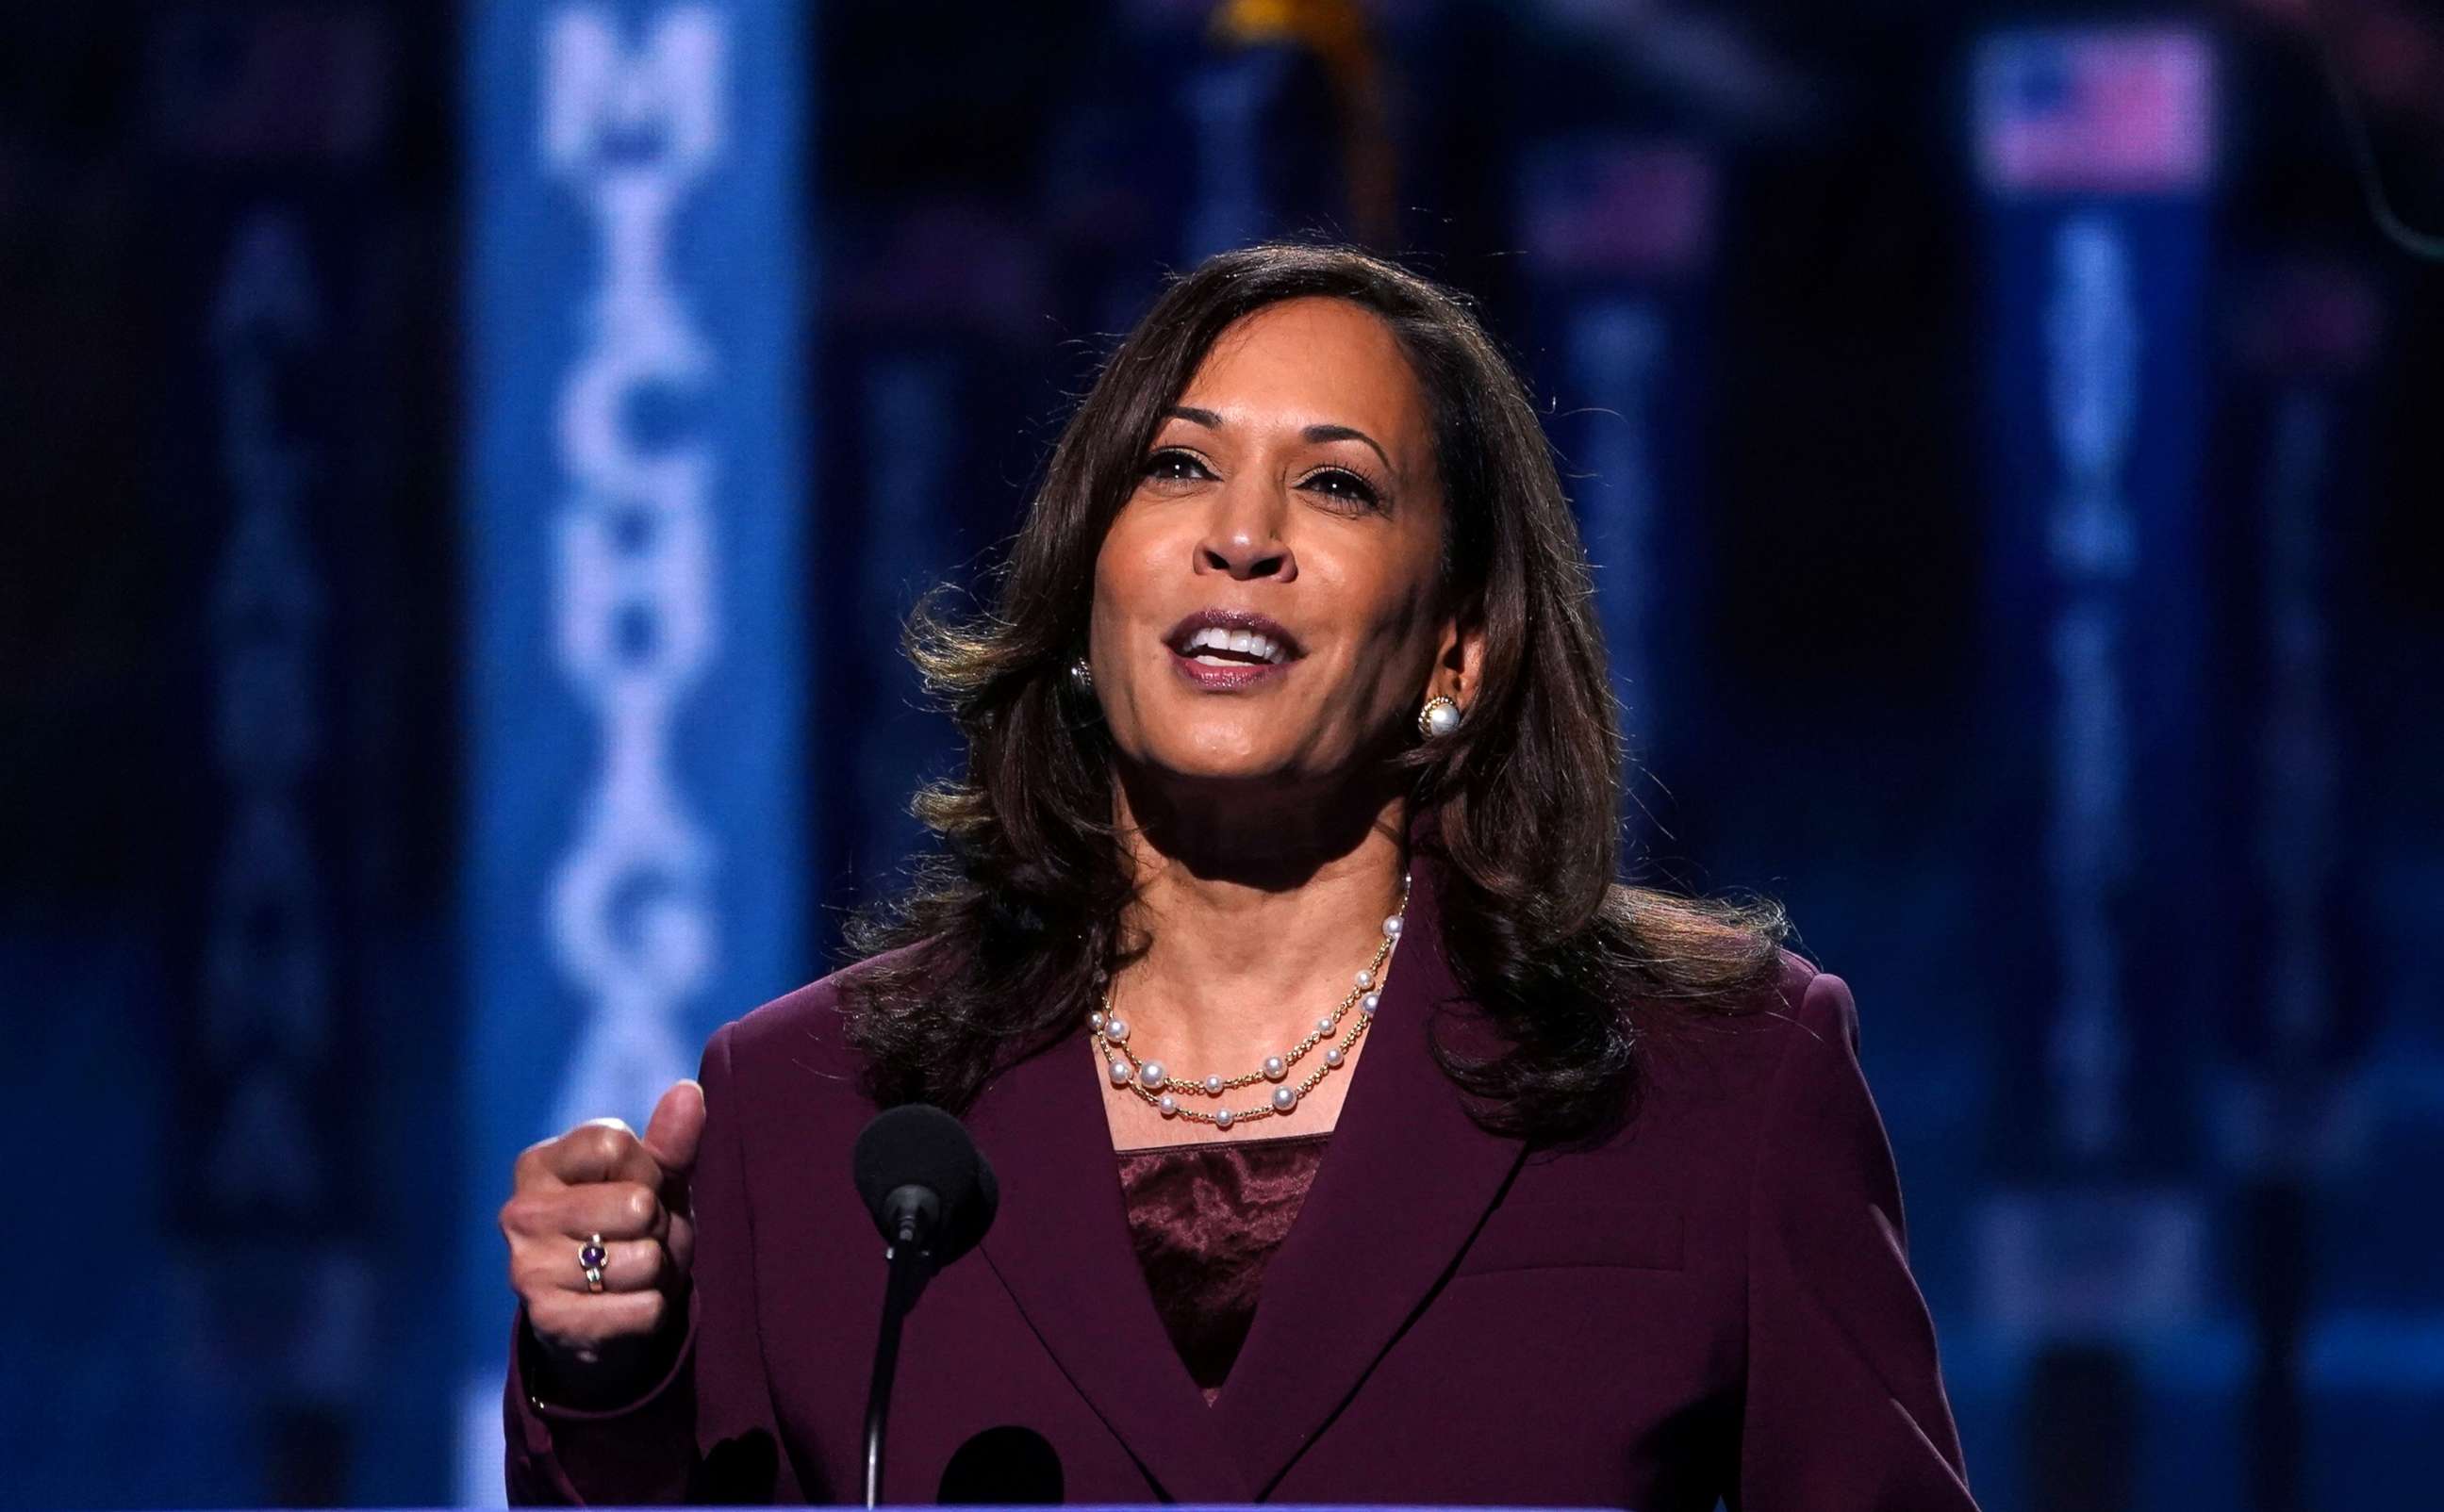 PHOTO: Senator Kamala Harris accepts the Democratic vice presidential nomination during an acceptance speech delivered for the largely virtual 2020 Democratic National Convention from the Chase Center in Wilmington, Del., Aug. 19, 2020.